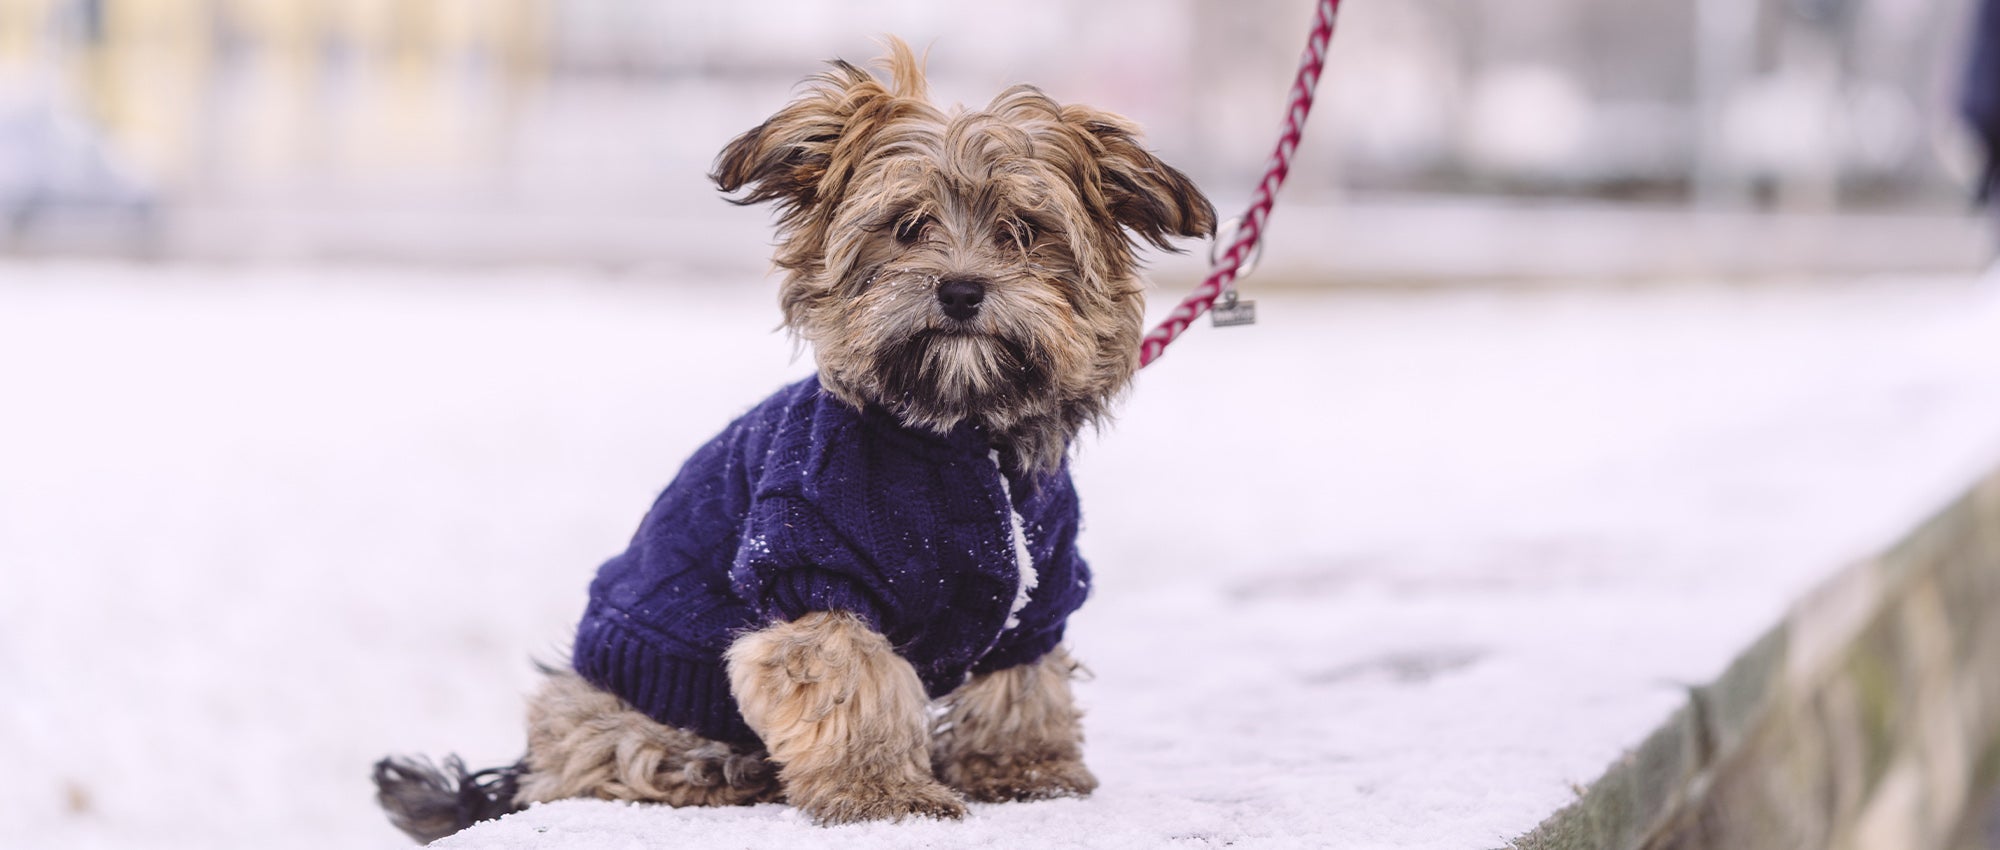 Five ways to protect pets in winter | The Humane Society of the United  States